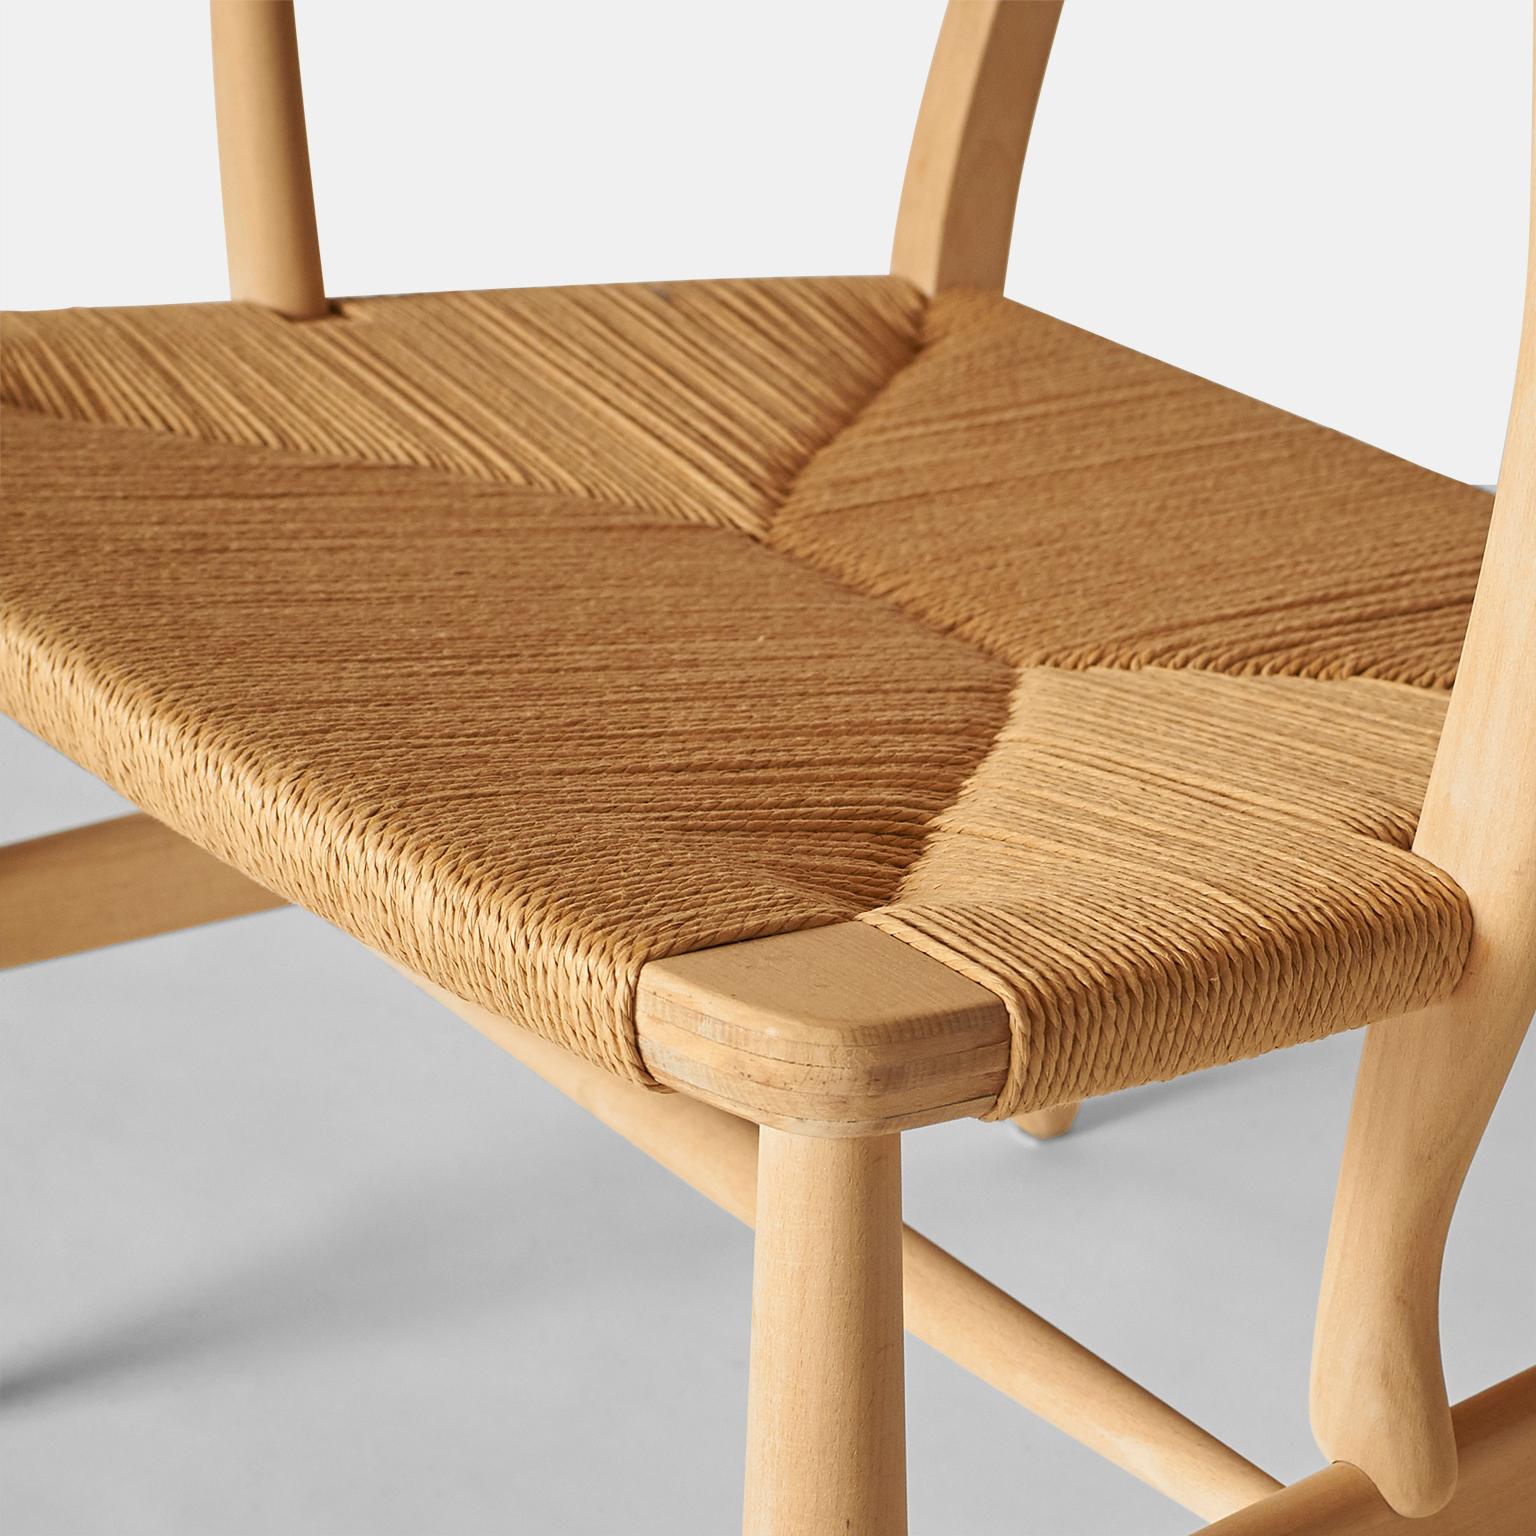 A freshly renovated easy chair by Hans J Wegner. Soap treated beech frame and new papercord seat. Model CH-22, produced by Carl Hansen and Son.